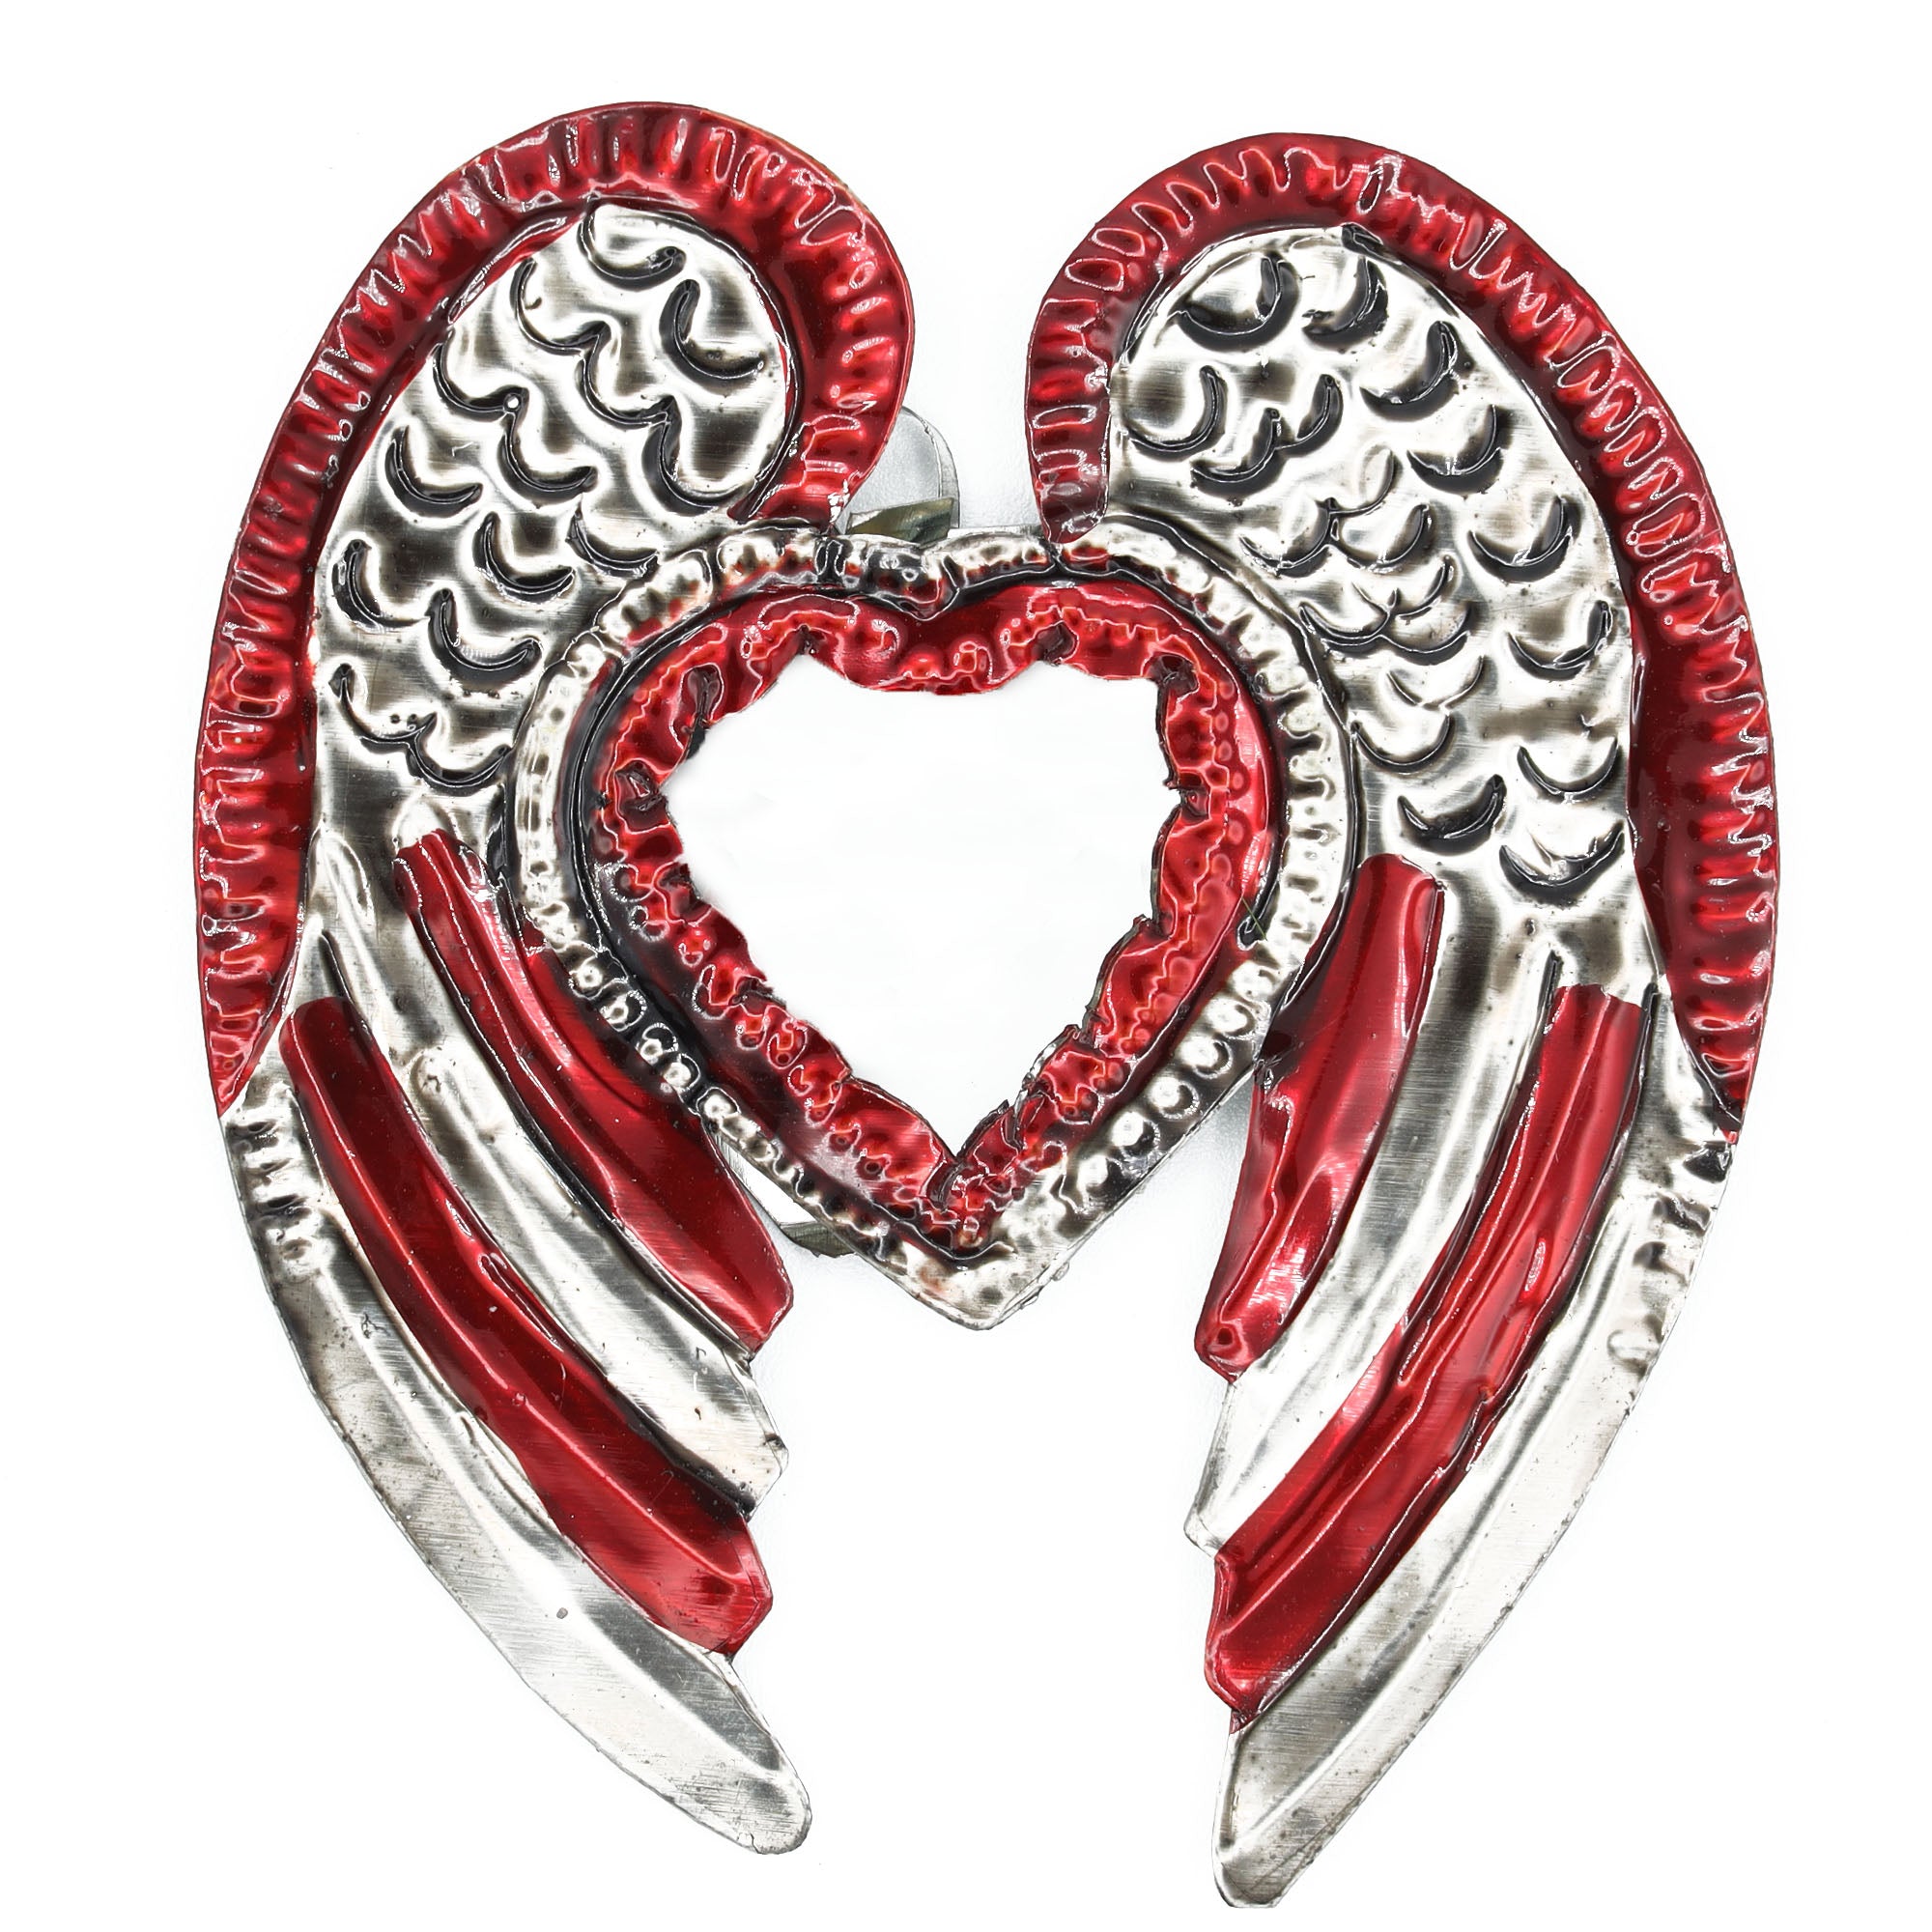 Medium Mexican Winged Milagro Tin Heart with Mirror